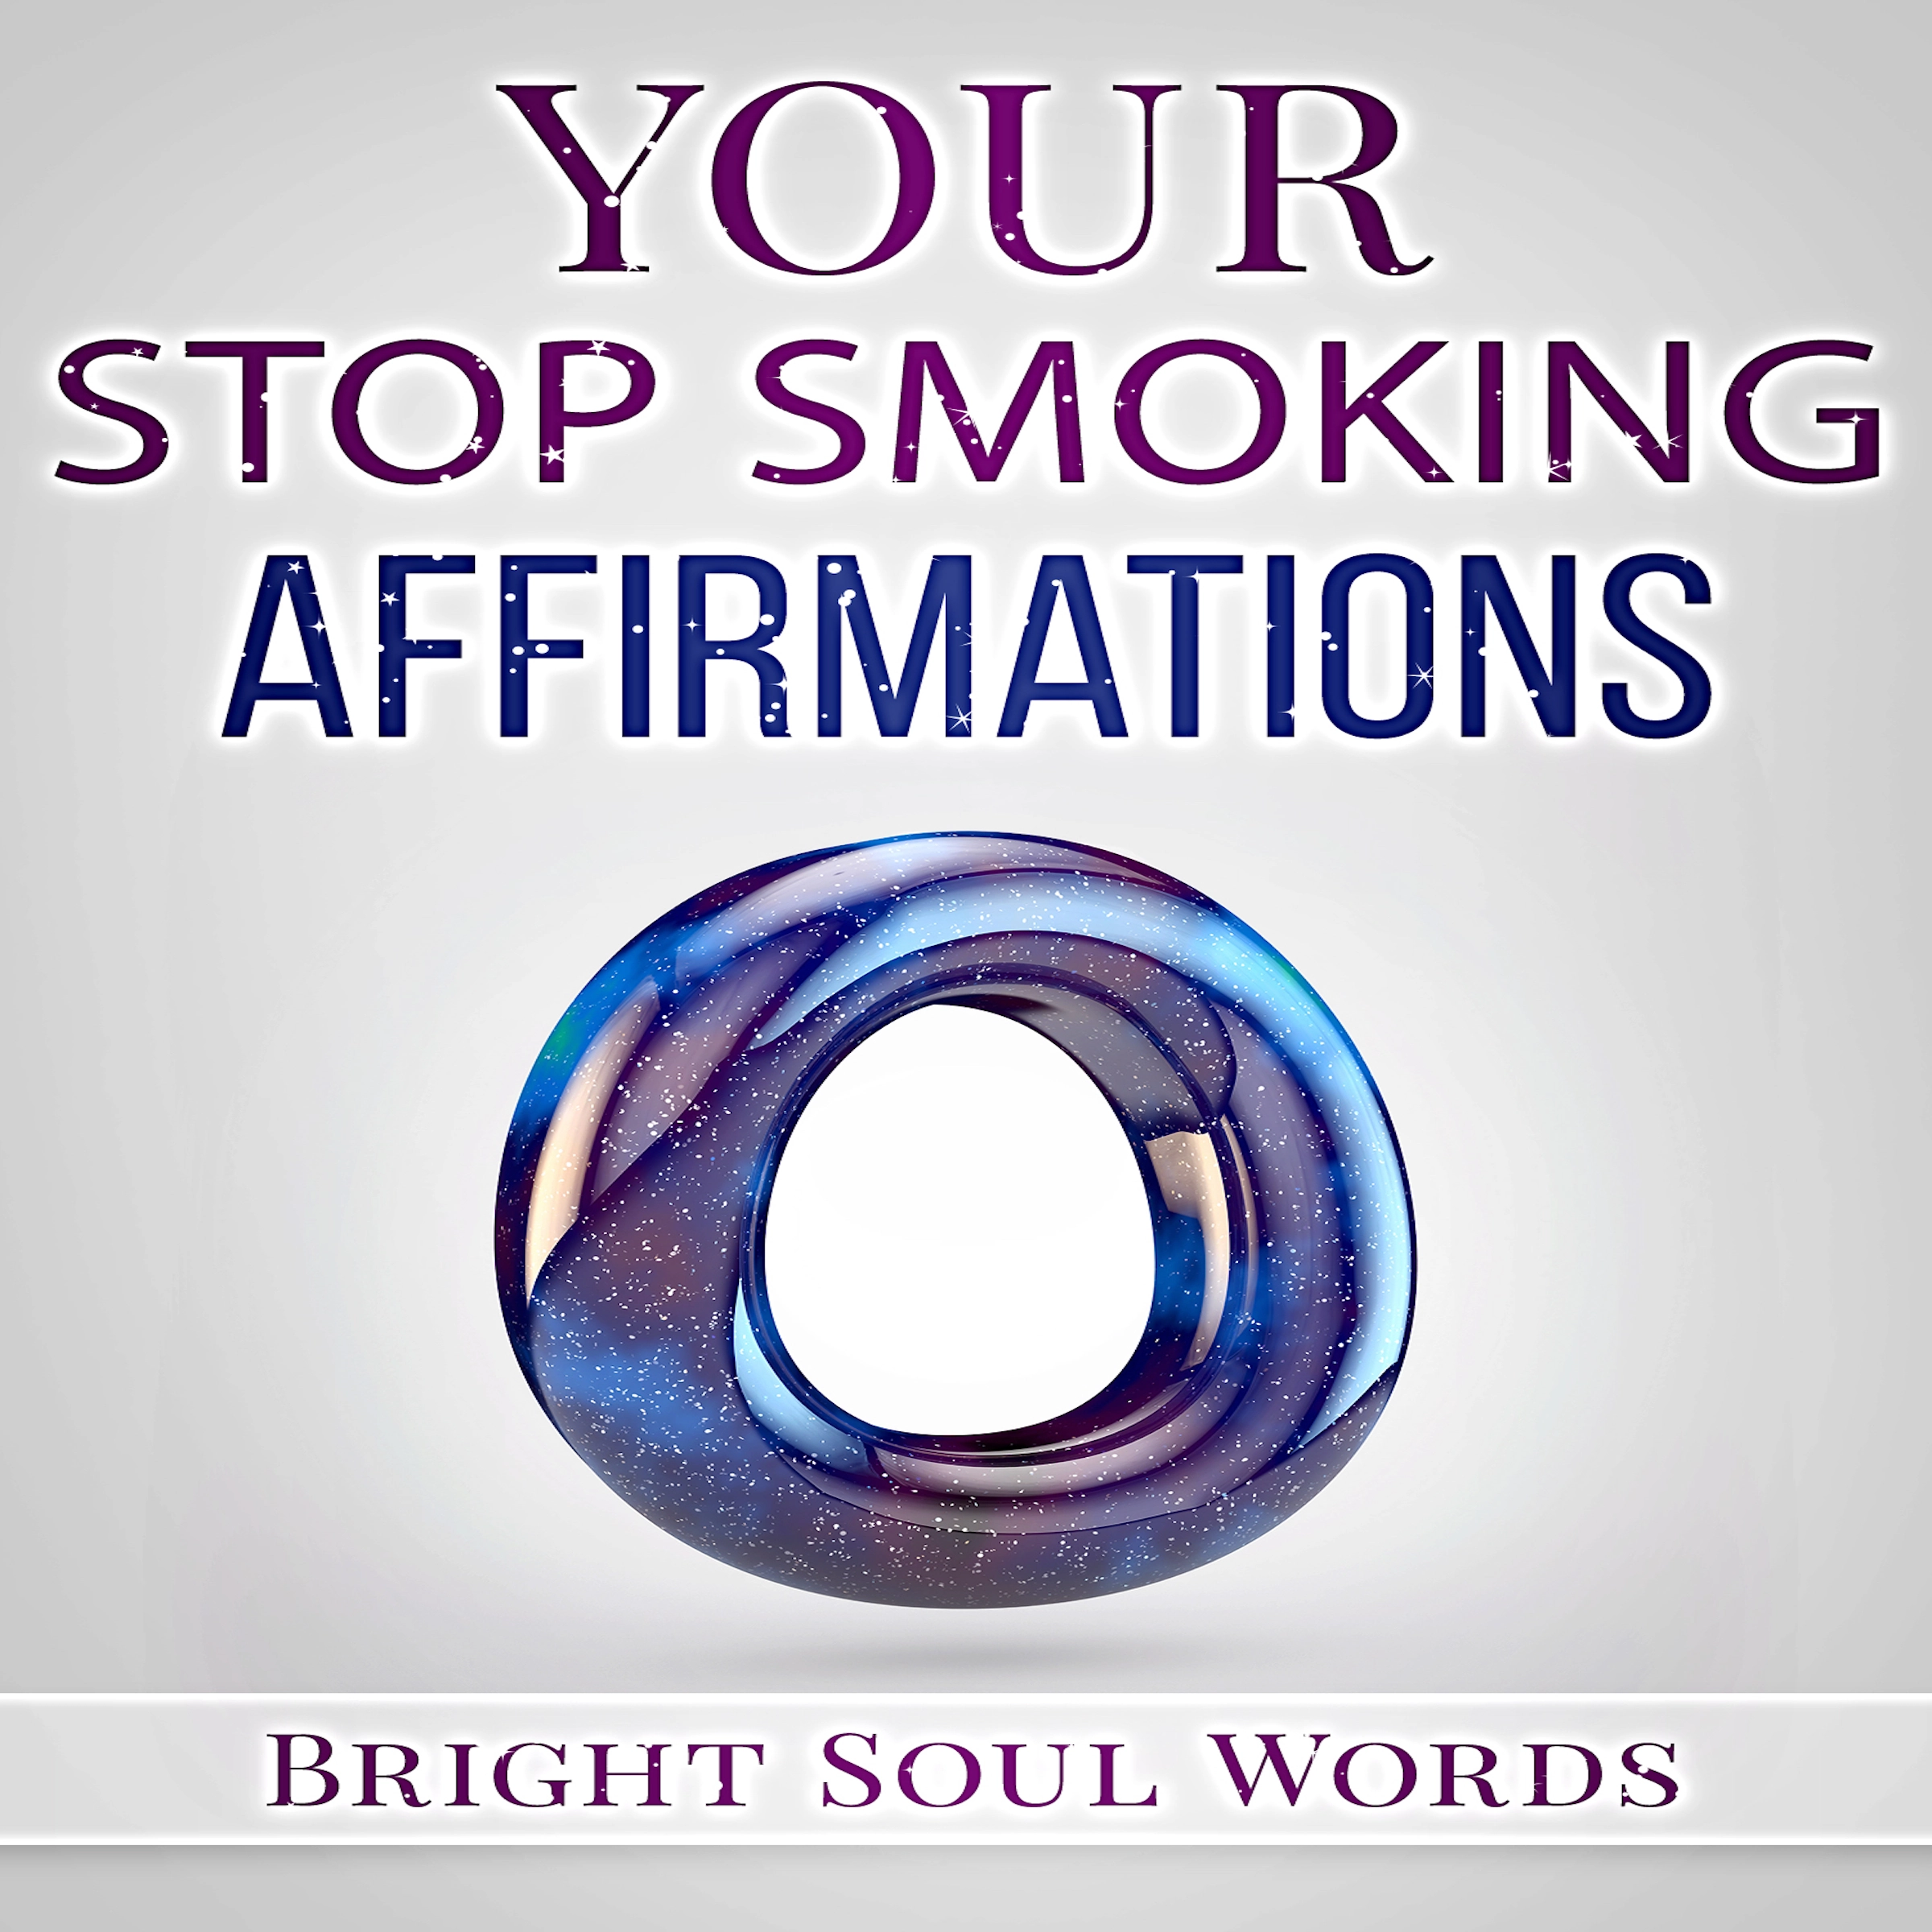 Your Stop Smoking Affirmations Audiobook by Bright Soul Words